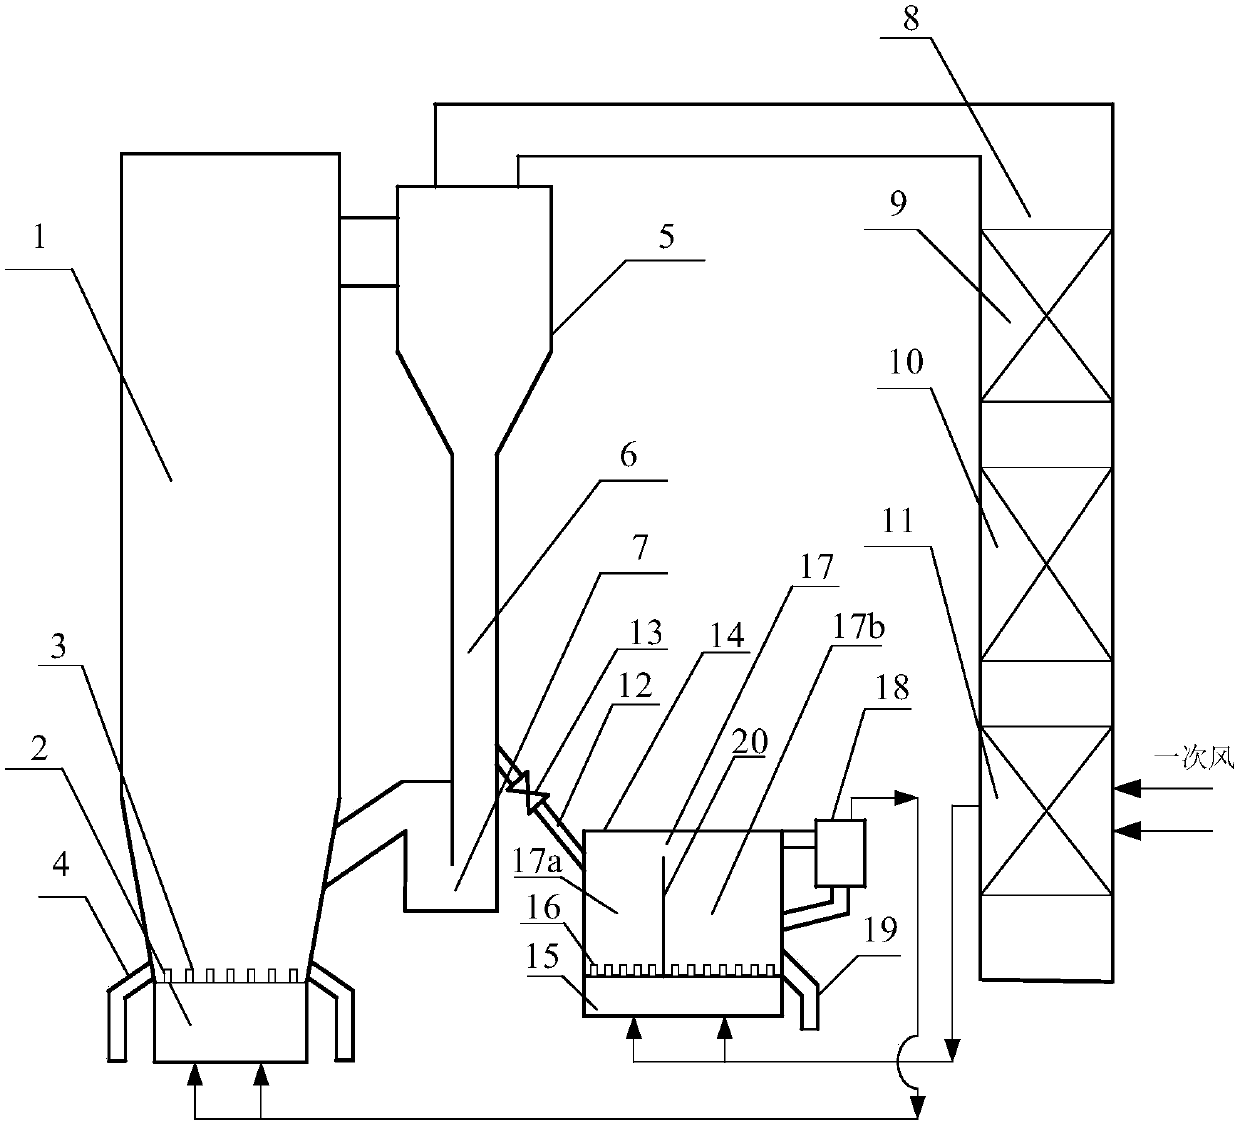 Circulating fluidized bed boiler for burning low-heat-value high-ash fuel